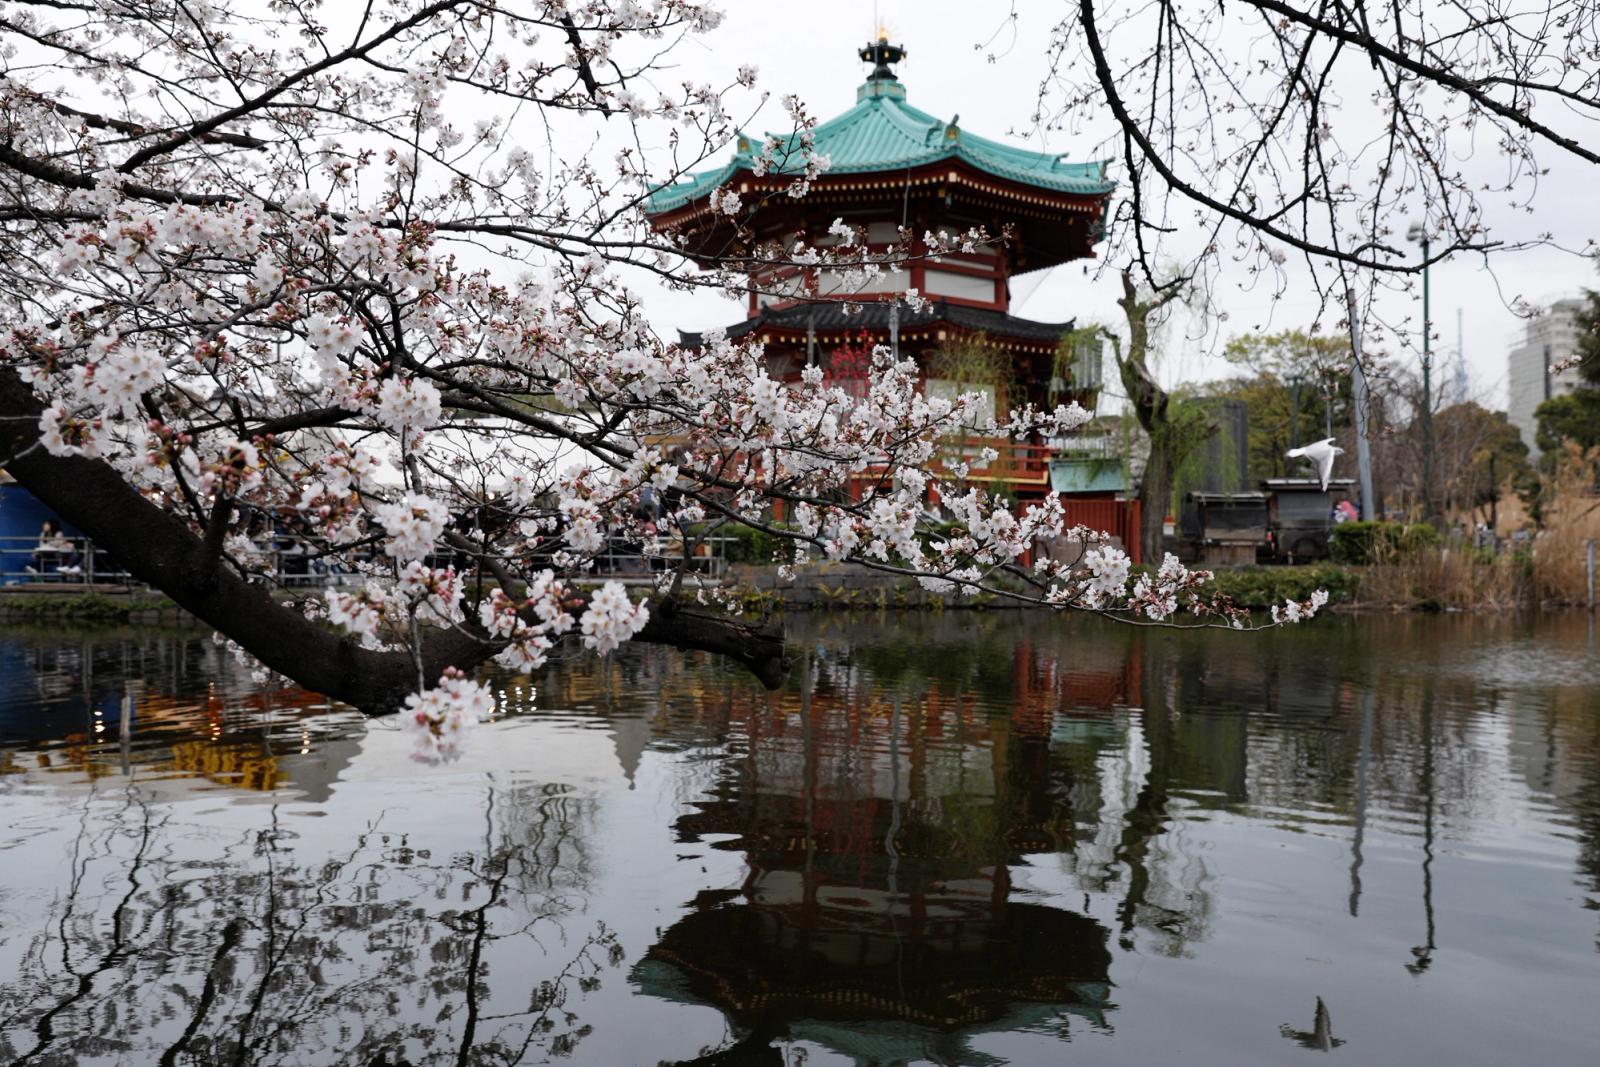 A view shows cherry blossom trees over a pond at Ueno park in Tokyo, Japan, March 21, 2023. REUTERS/Androniki Christodoulou